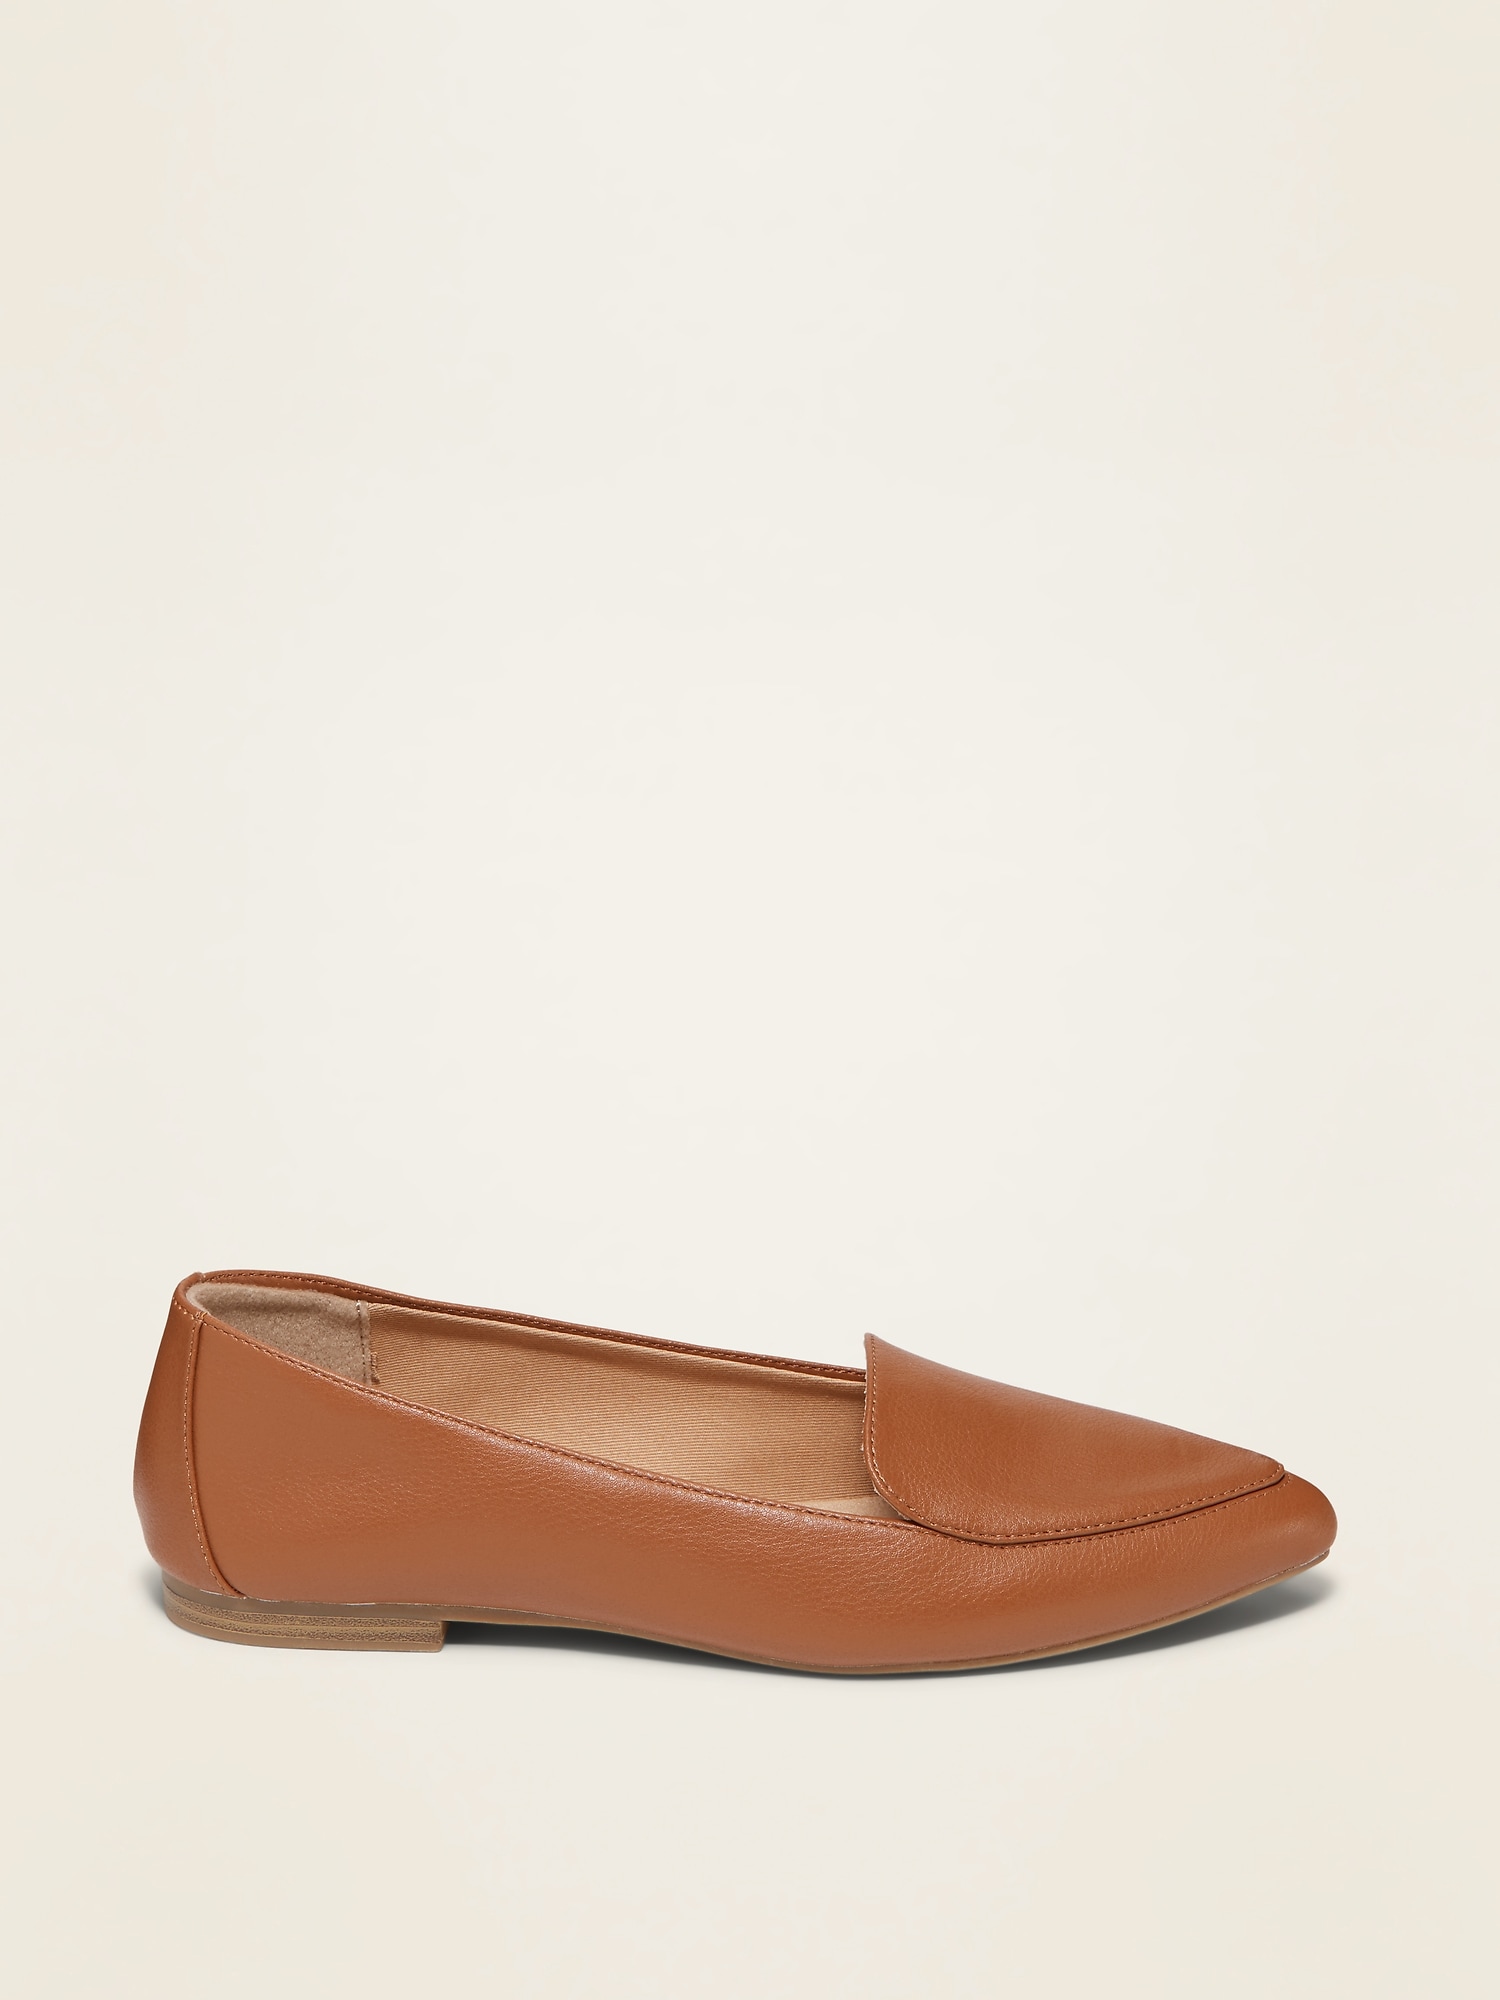 leather loafers women